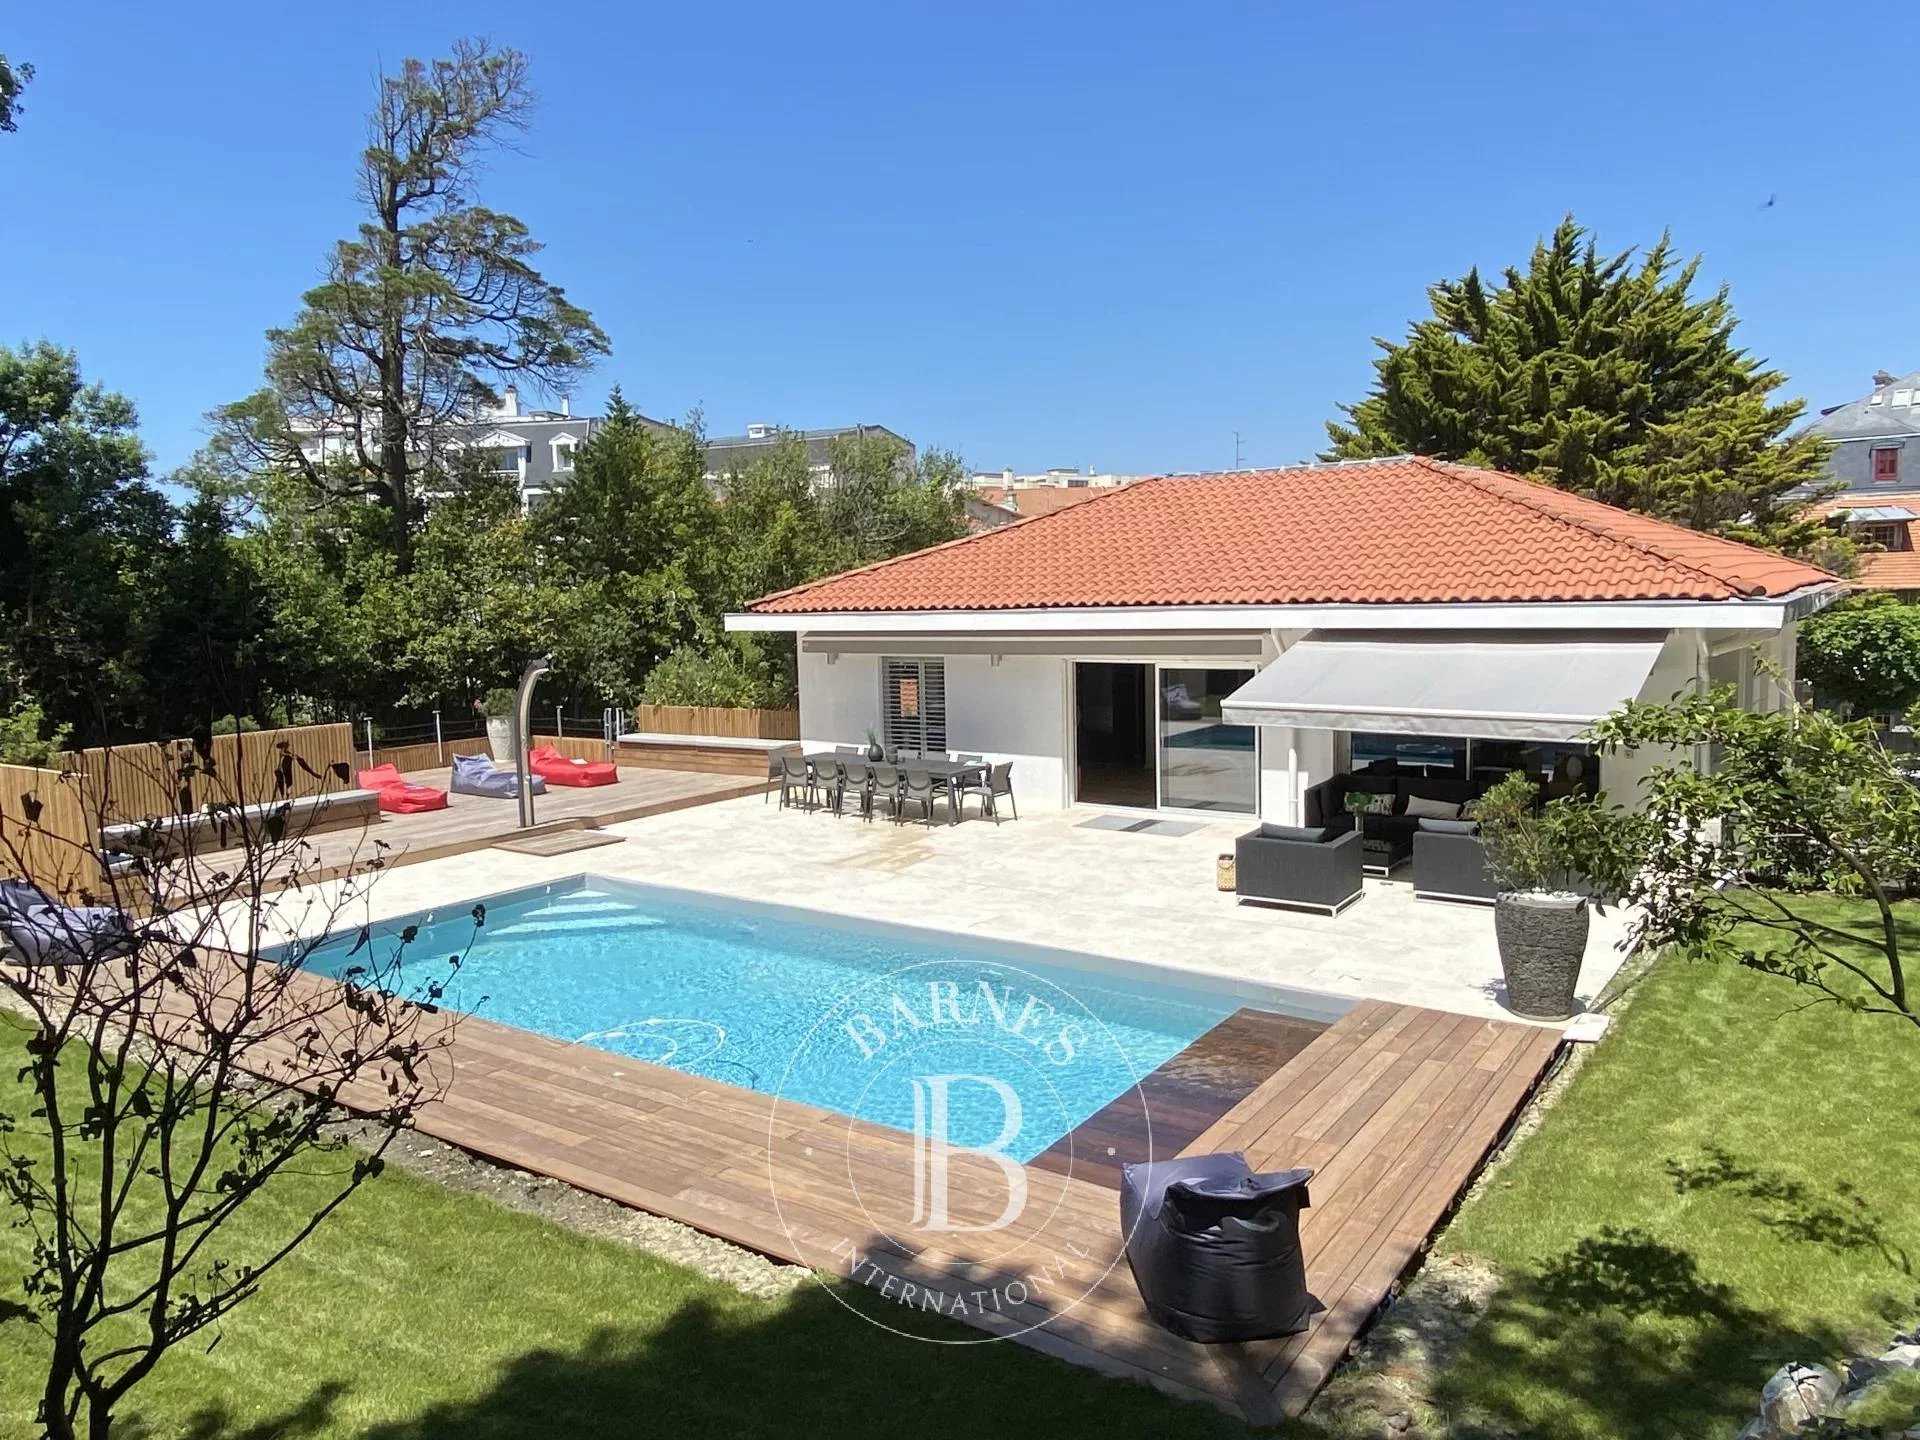 Spacious 6 bedroom Villa with Heated Pool in the heart of Biarritz picture 20